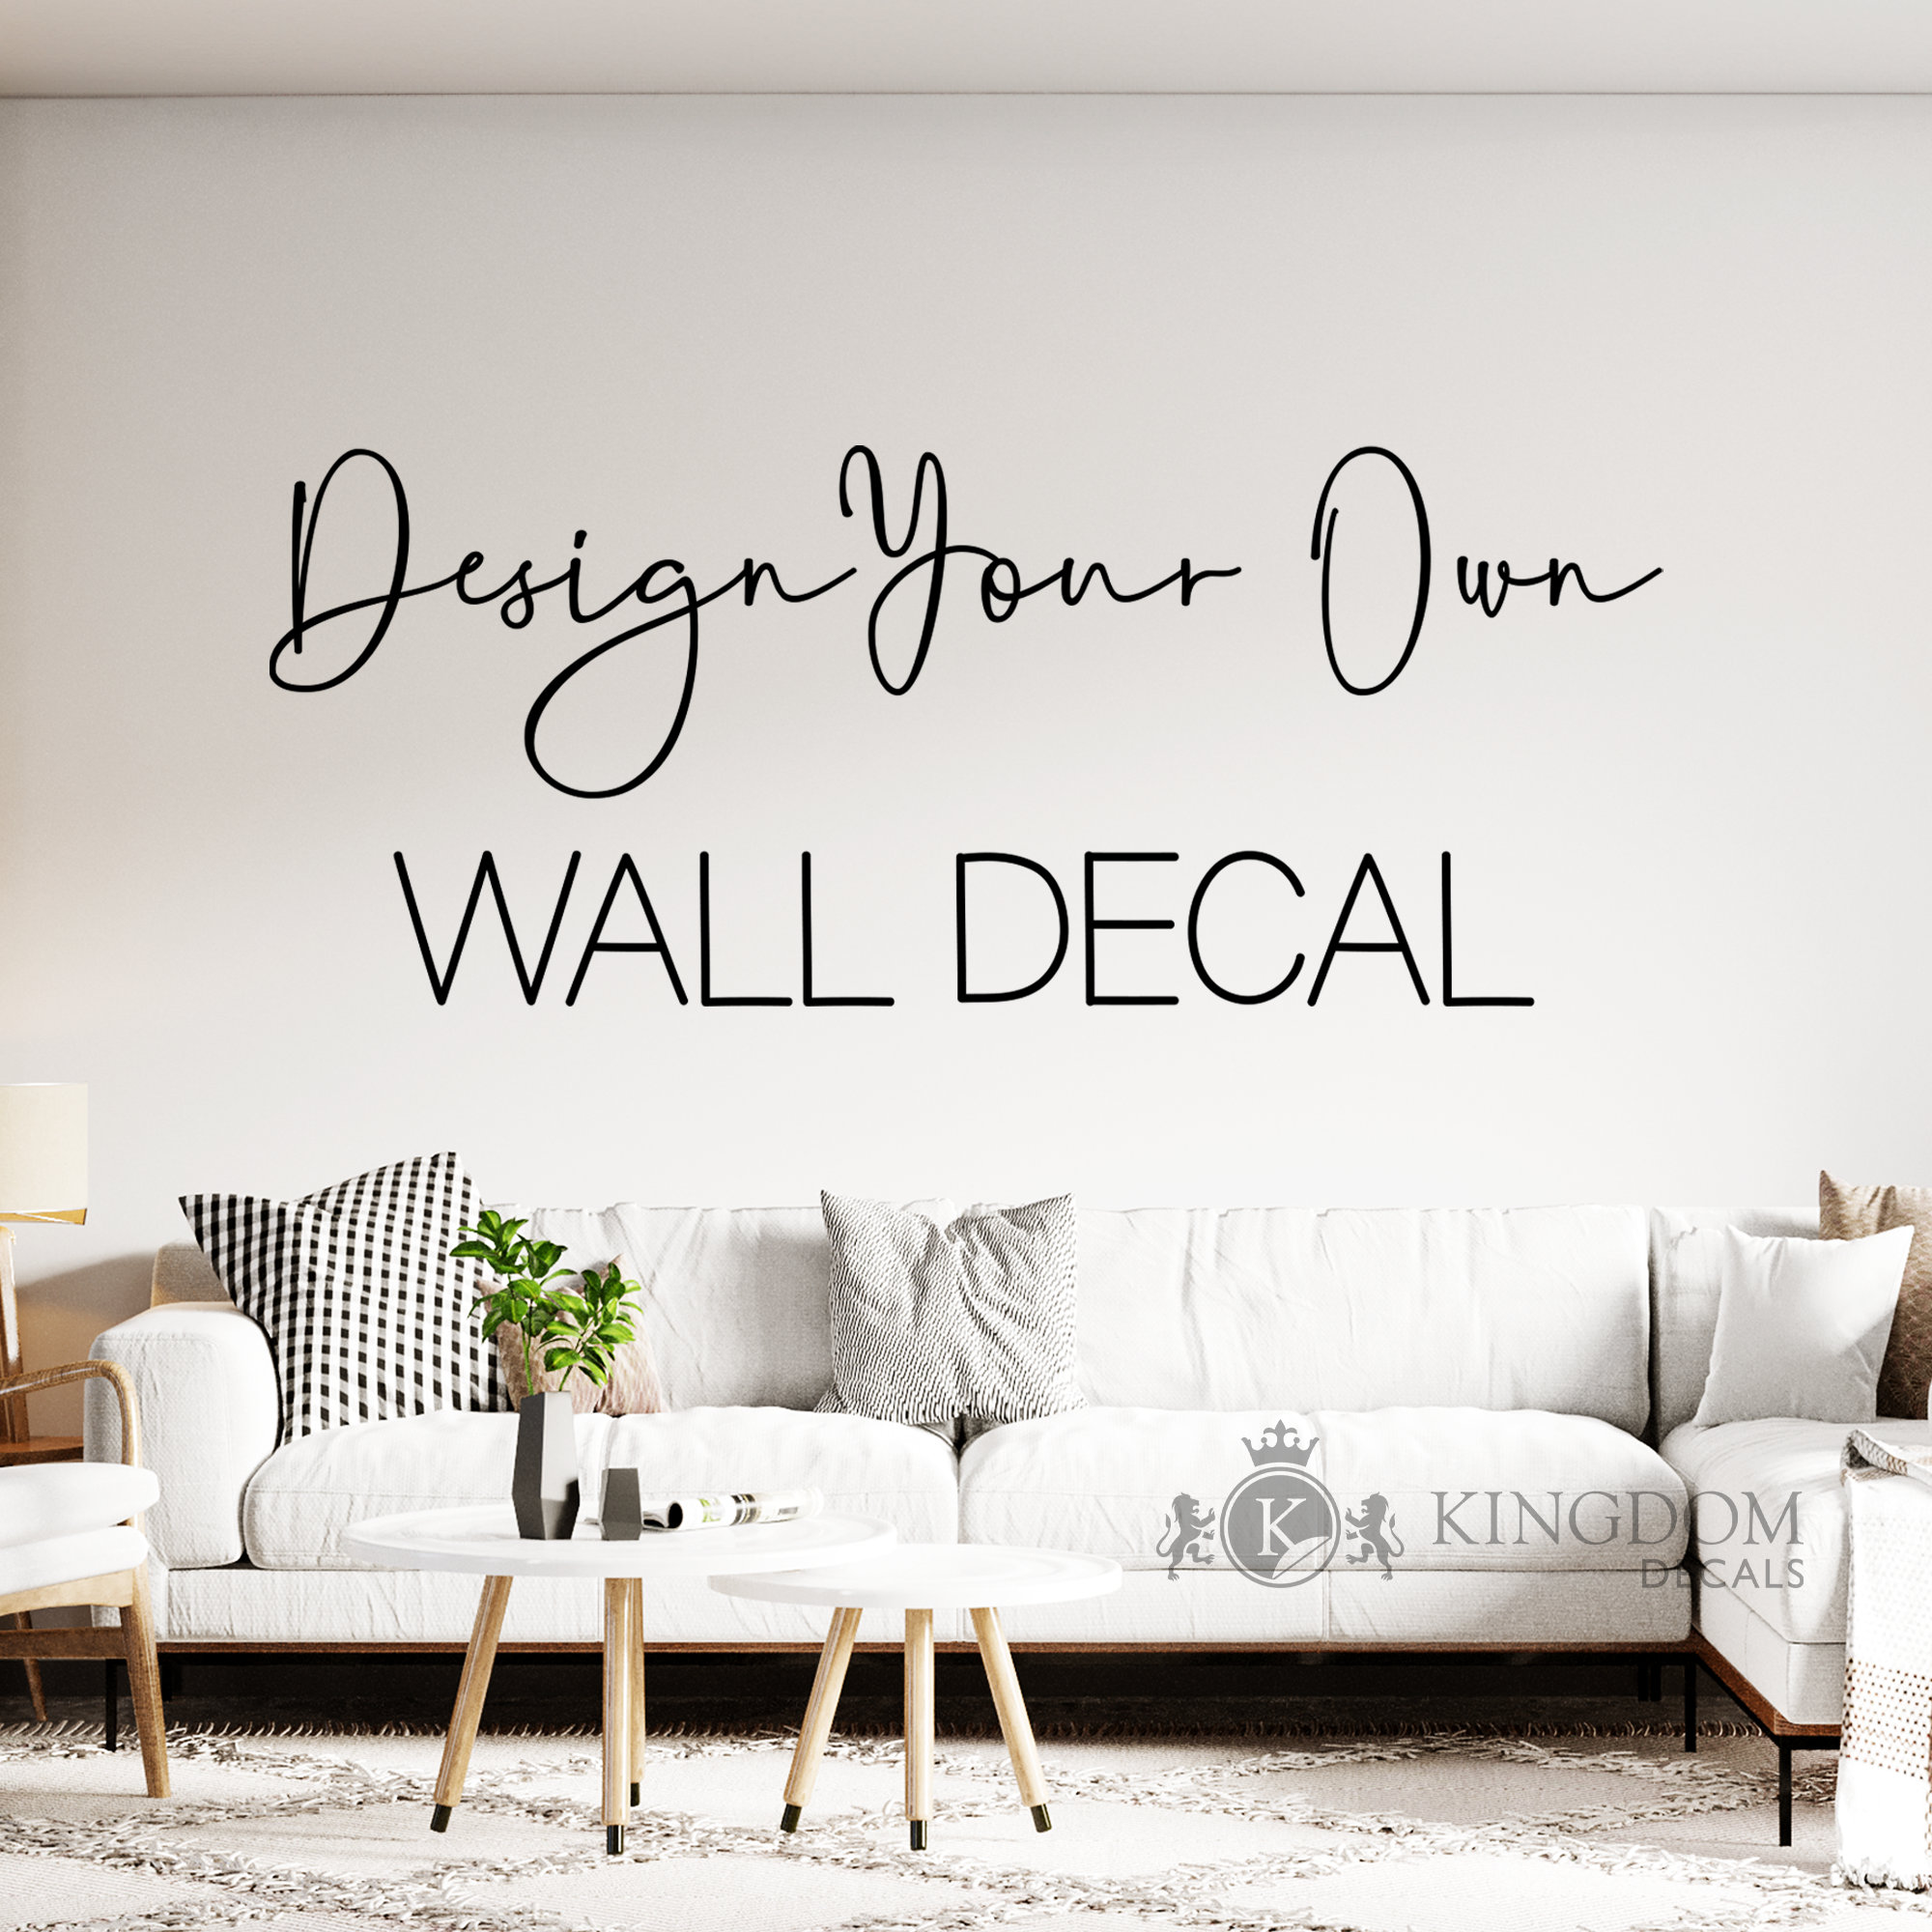 Large Letter Stickers, Wall Letter Decals DB148-177 – Designed Beginnings